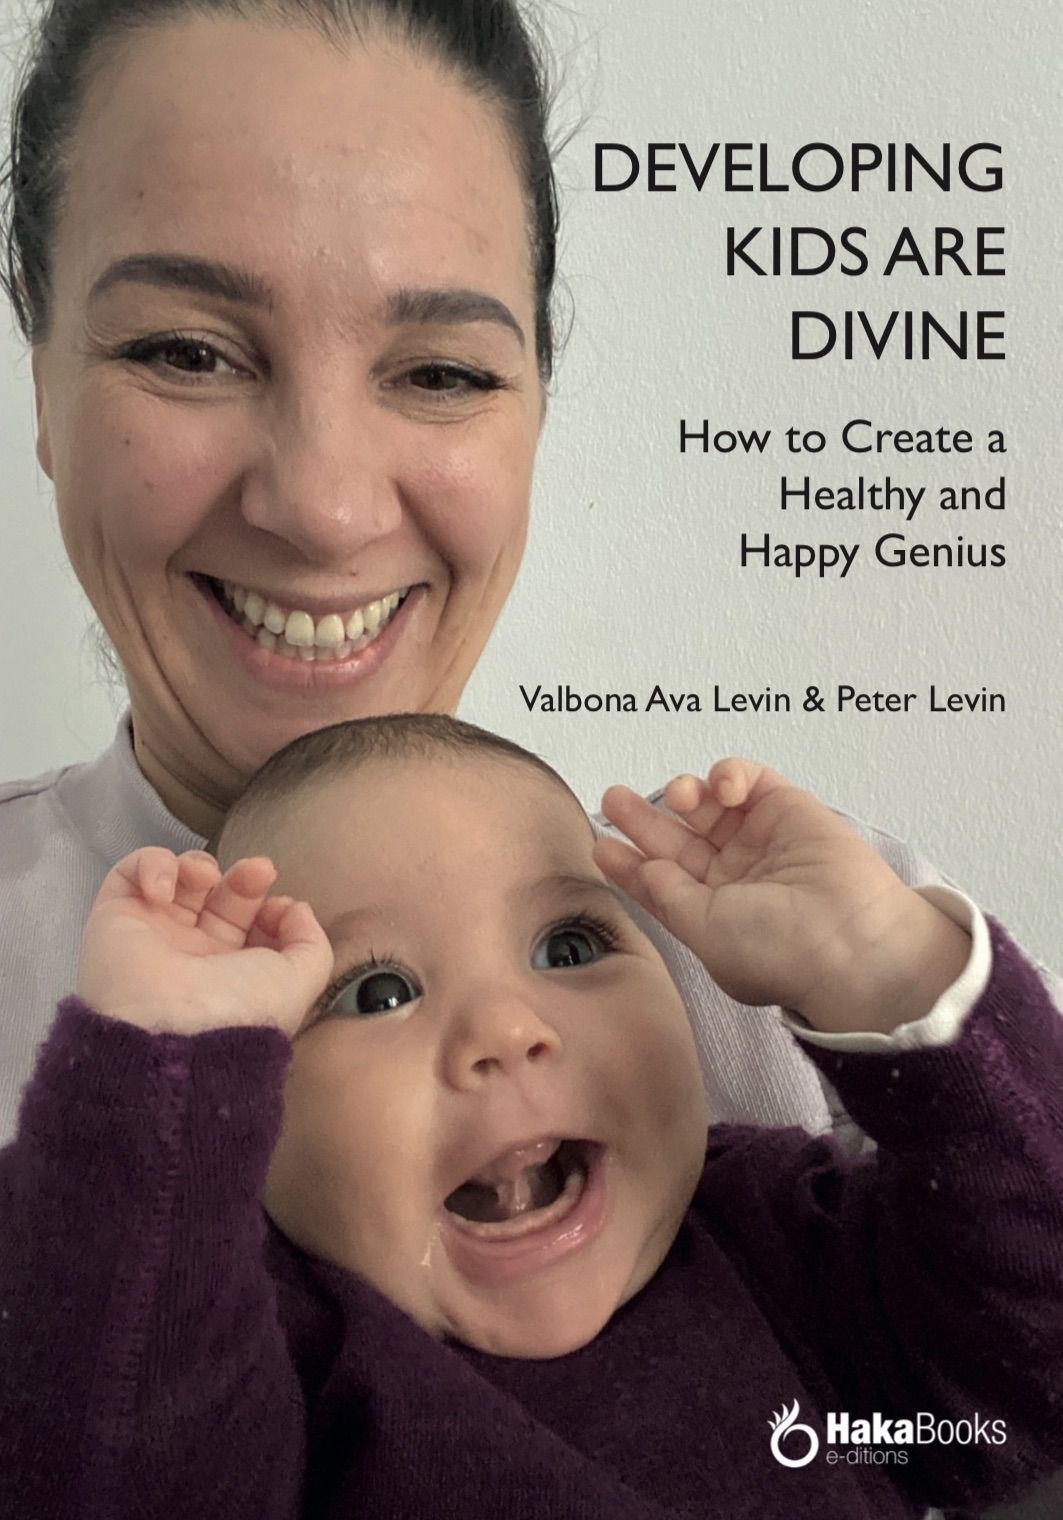 Developing kids are divine 2